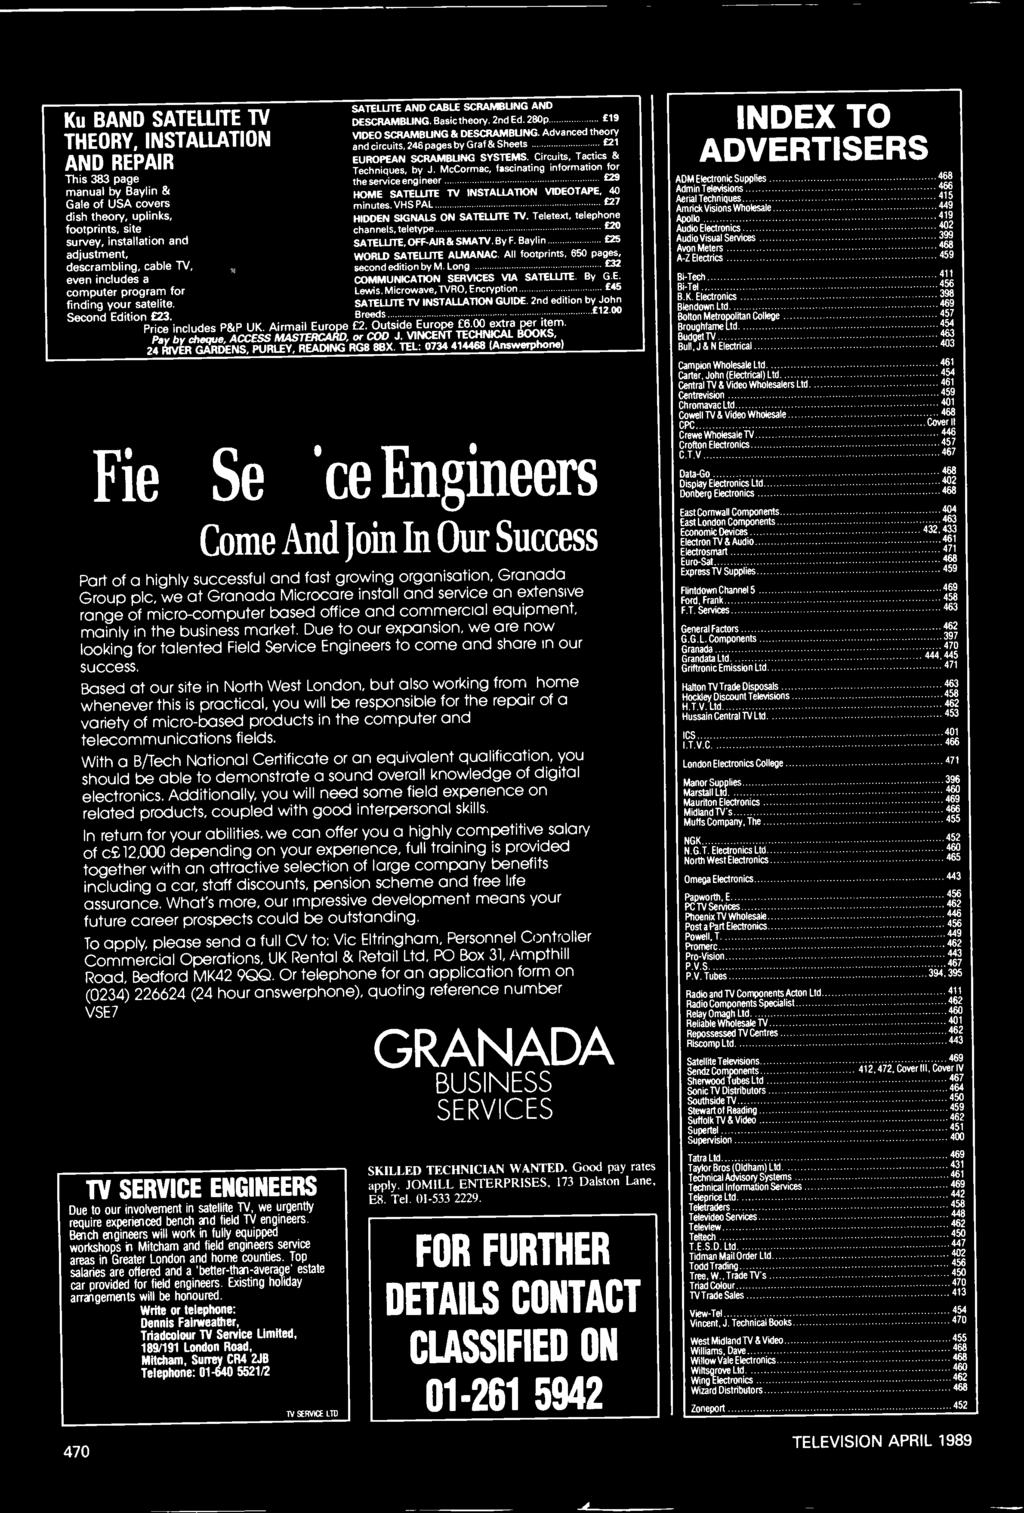 Advanced theory and circuits, 246 pages by Graf & Sheets E21 EUROPEAN SCRAMBUNG SYSTEMS. Circuits, Tactics & Techniques, by J.